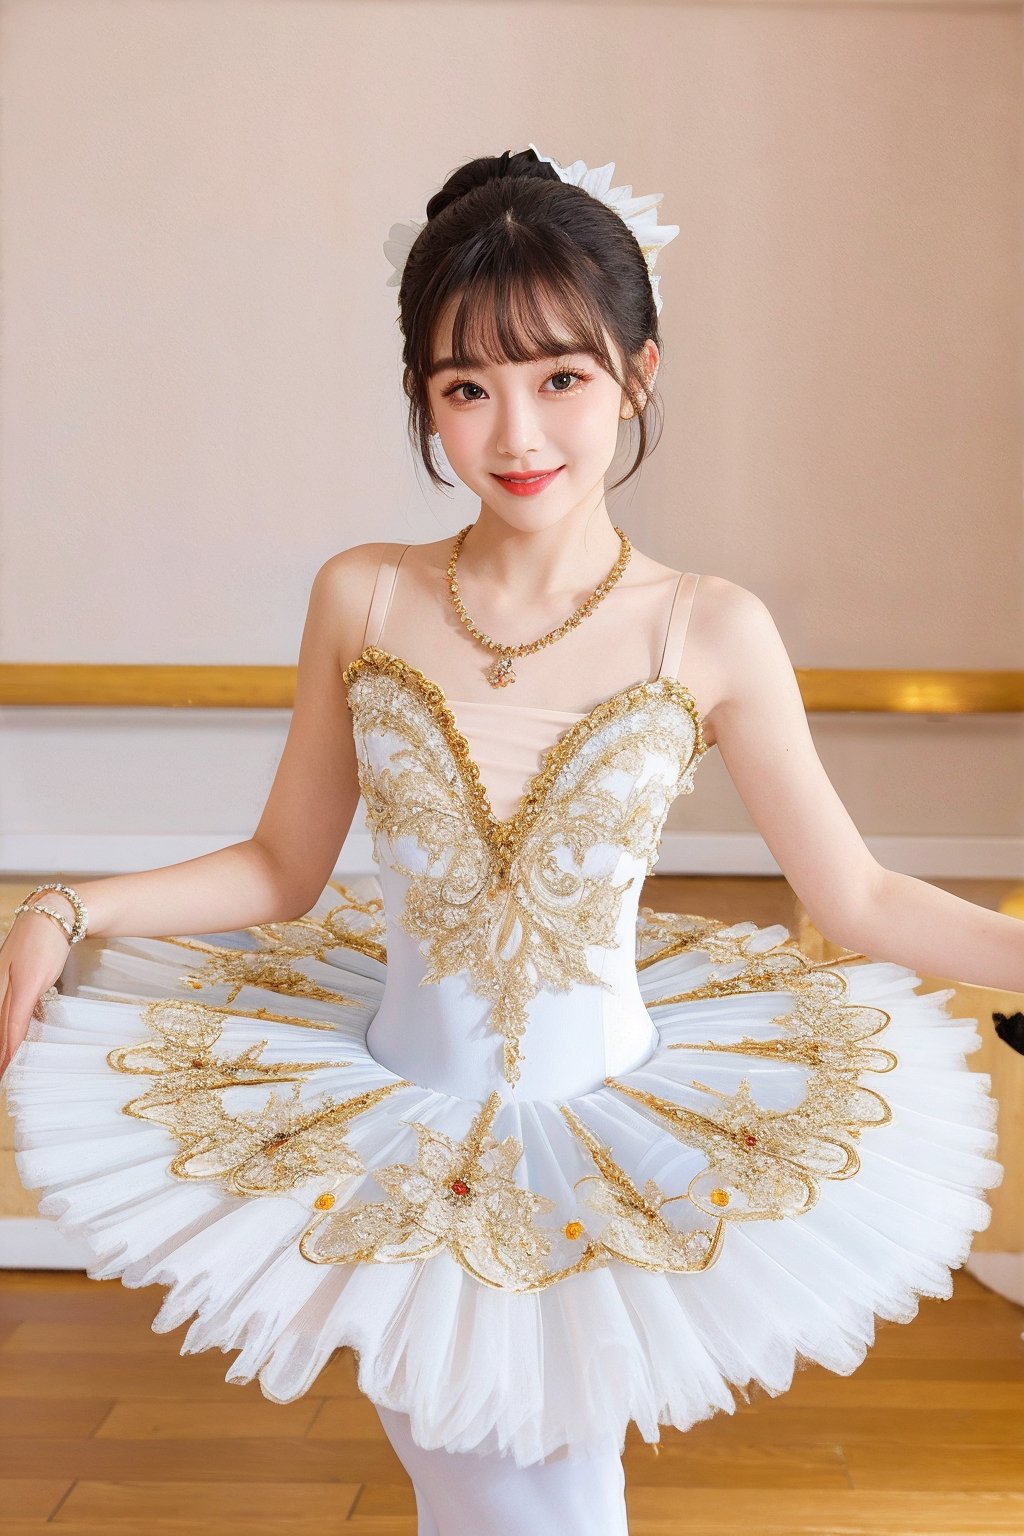 HDR,UHD,8K,best quality,masterpiece,Highly detailed,Studio lighting,ultra-fine painting,sharp focus,physically-based rendering,extreme detail description,Professional,masterpiece, best quality,delicate, beautiful,(1girl),(Ballet_tutu:1.5),(jewelry:1.5),lace,(looking_at_viewer:1.2), realistic,(blunt bangs:1.2),(hair bun),(standing:1),(hair ornament:1.2), (jewelry necklace:1),dance classroom background,(Half-length photo:1),(smile:1),(white lace stockings:1),